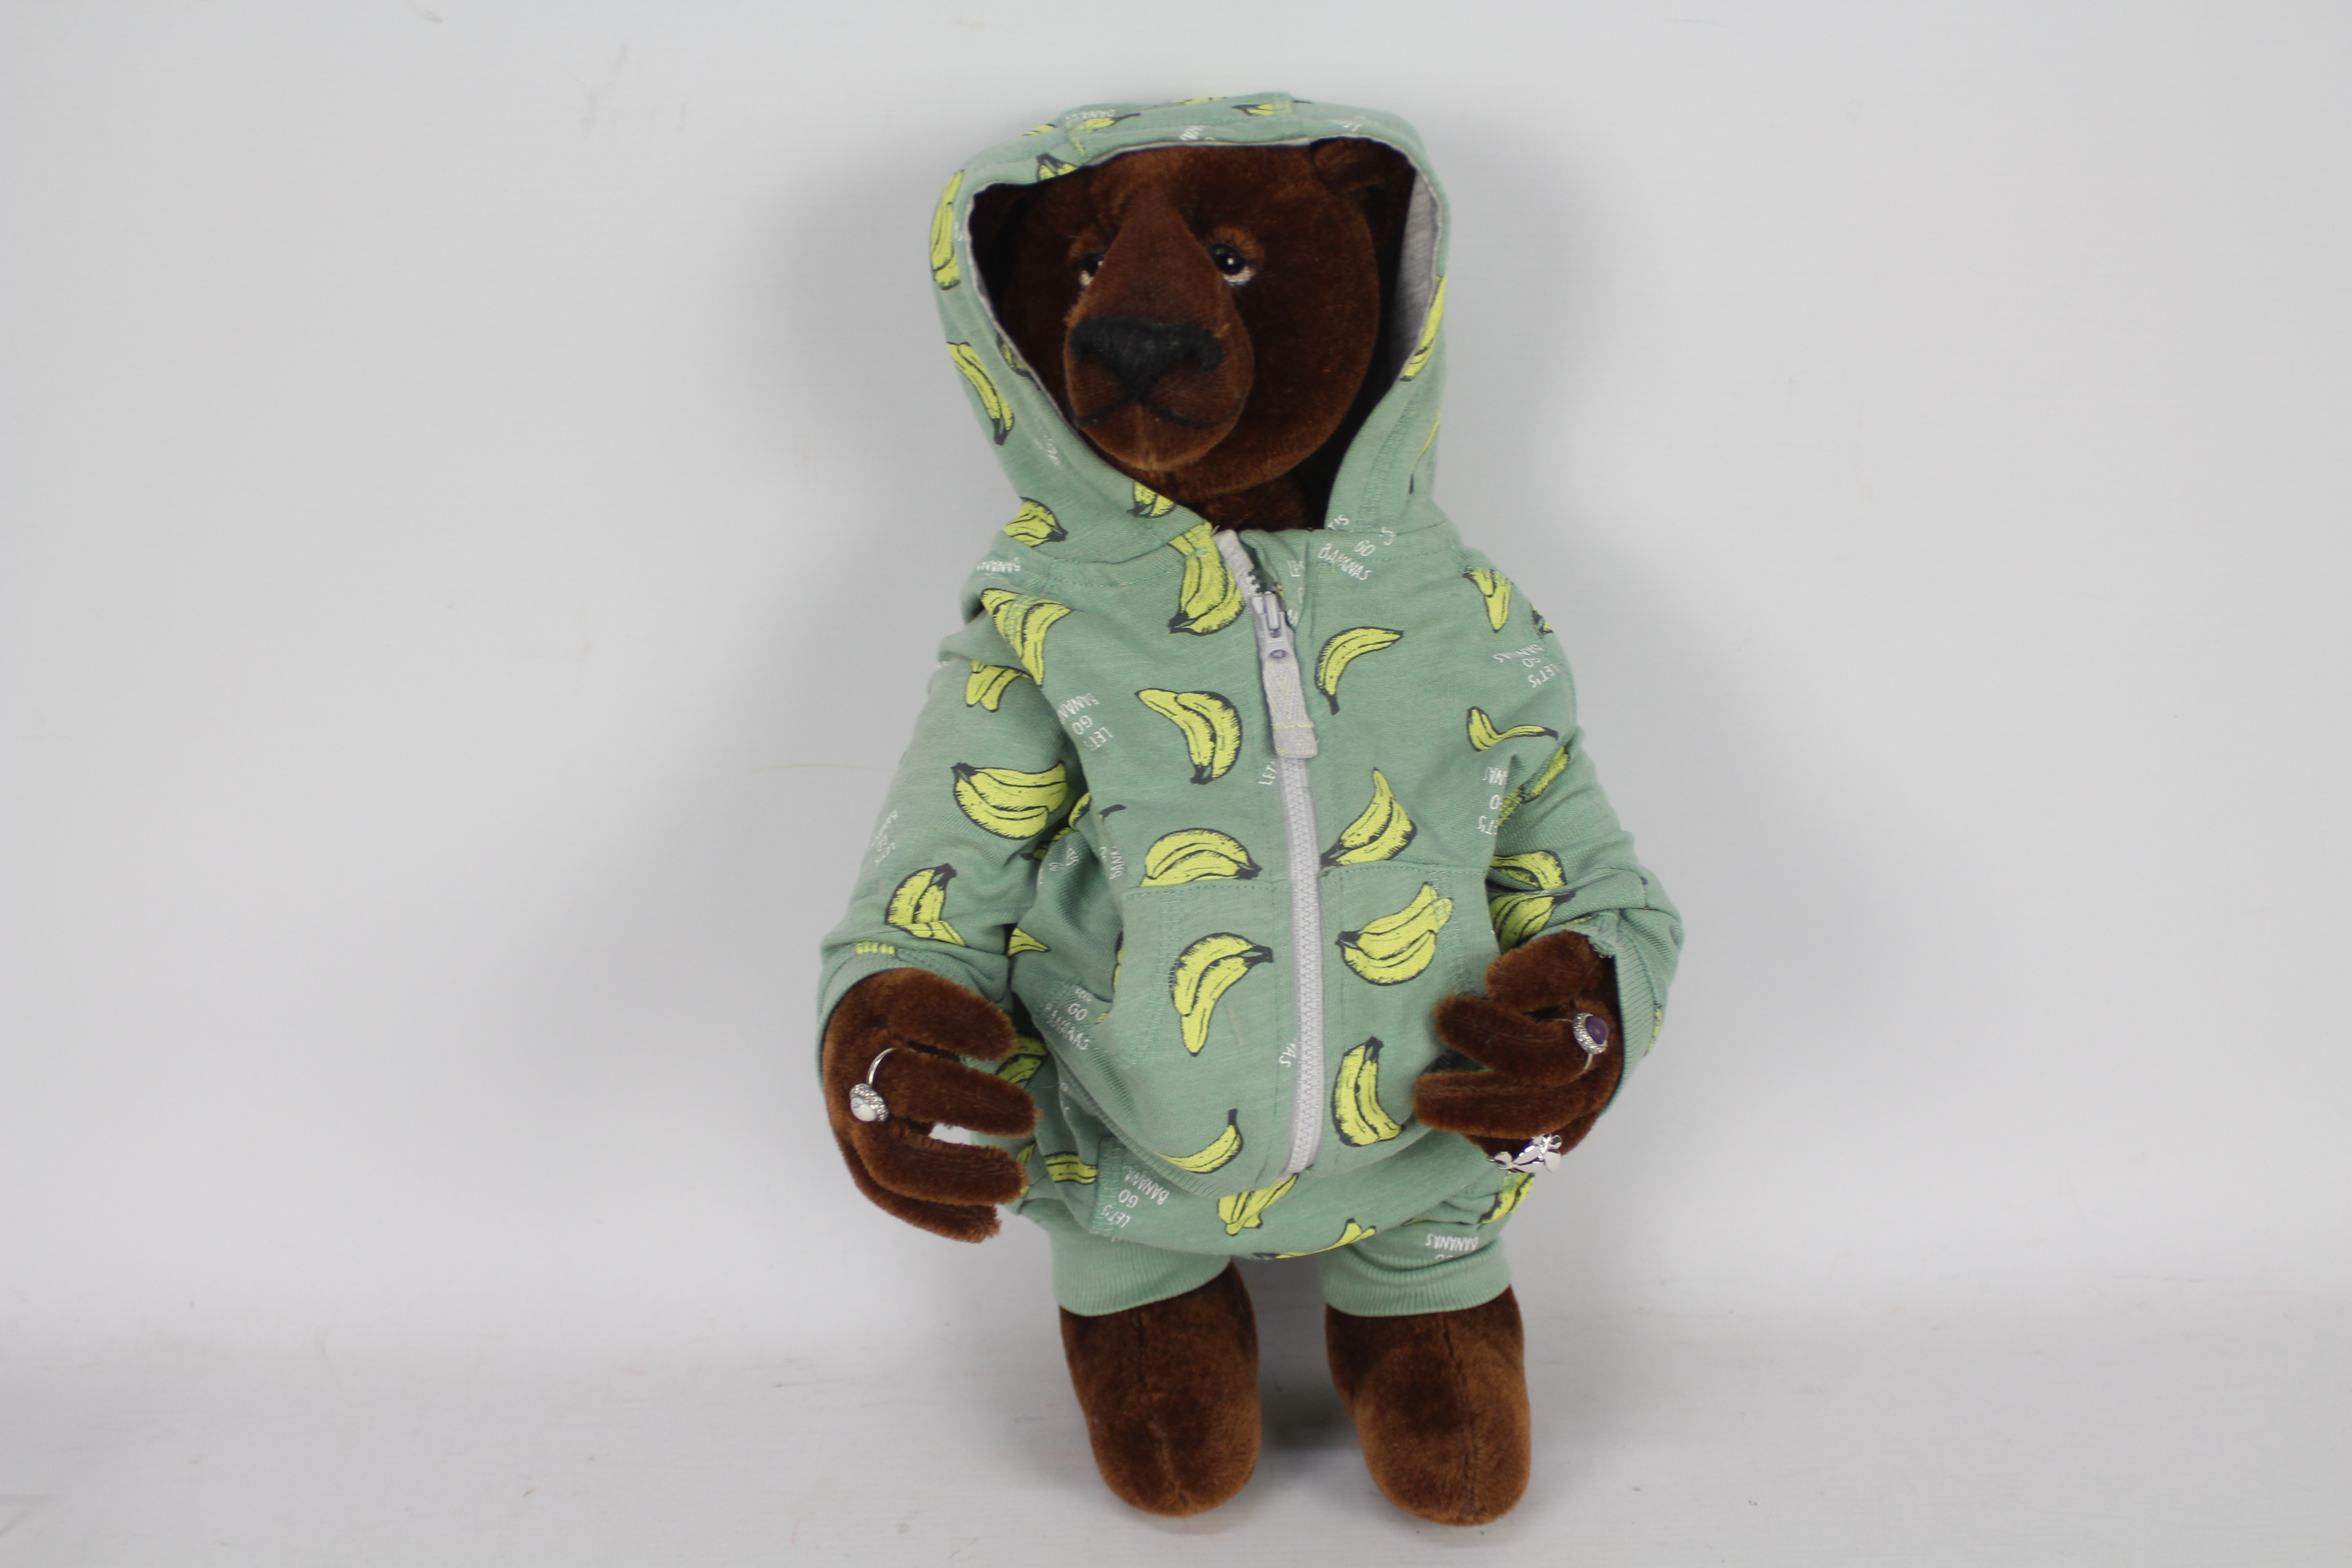 Out Of The Woods - A jointed brown traditional style bear made by Out Of The Woods Bears.